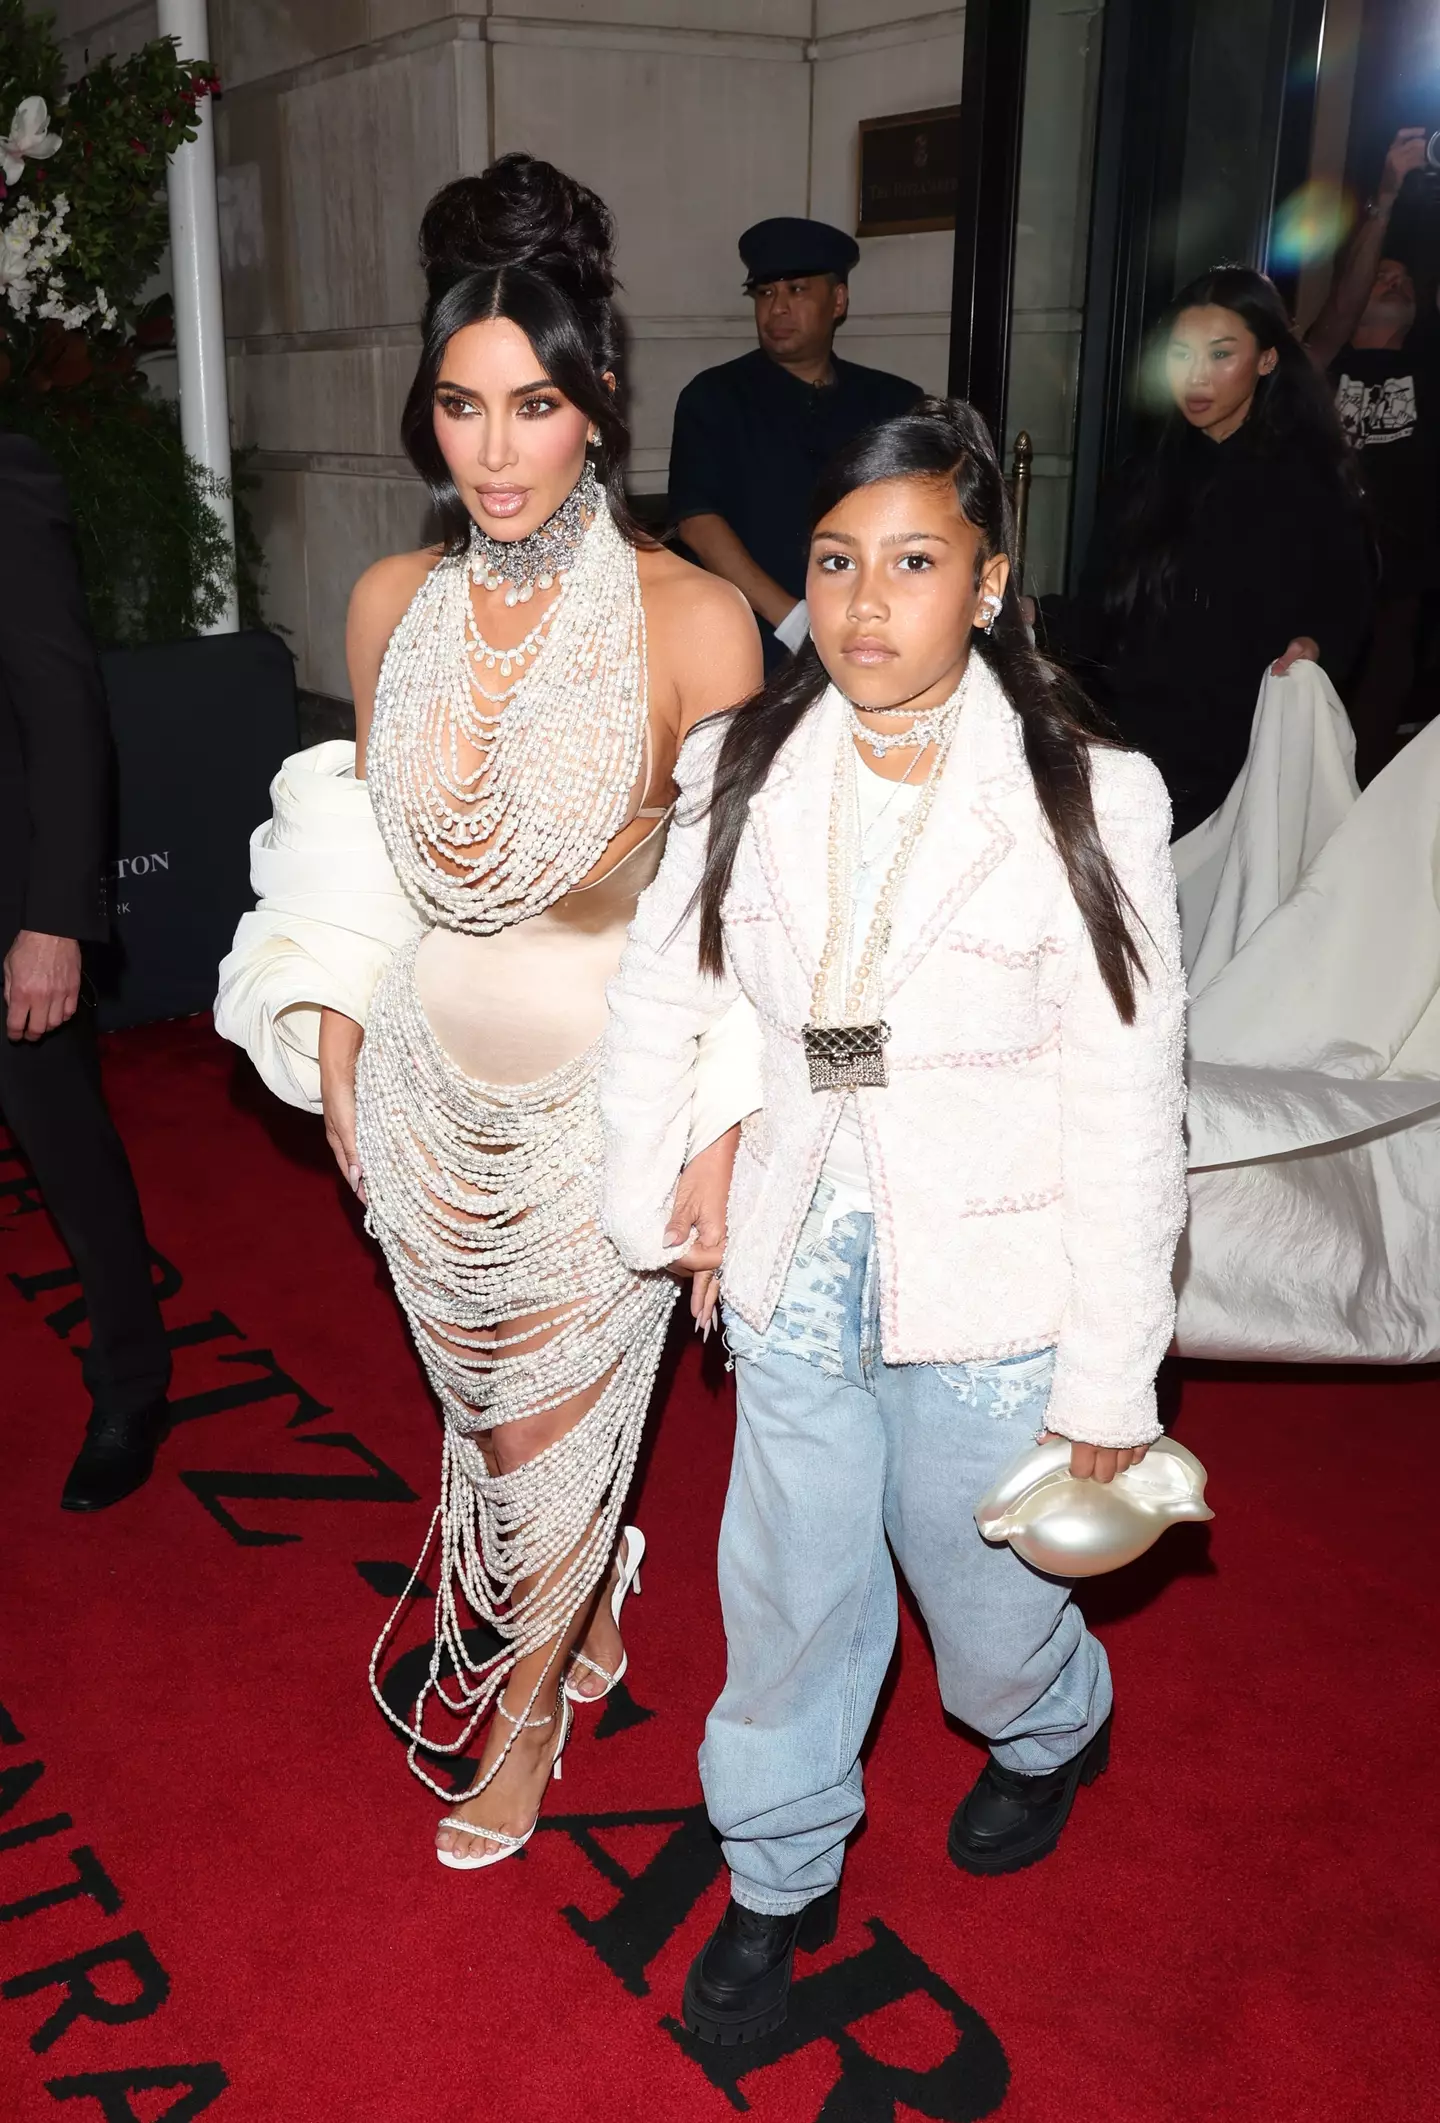 In the latest episode of The Kardashians, the young North attended a fitting with her mother in preparation for the 2023 Met Gala.